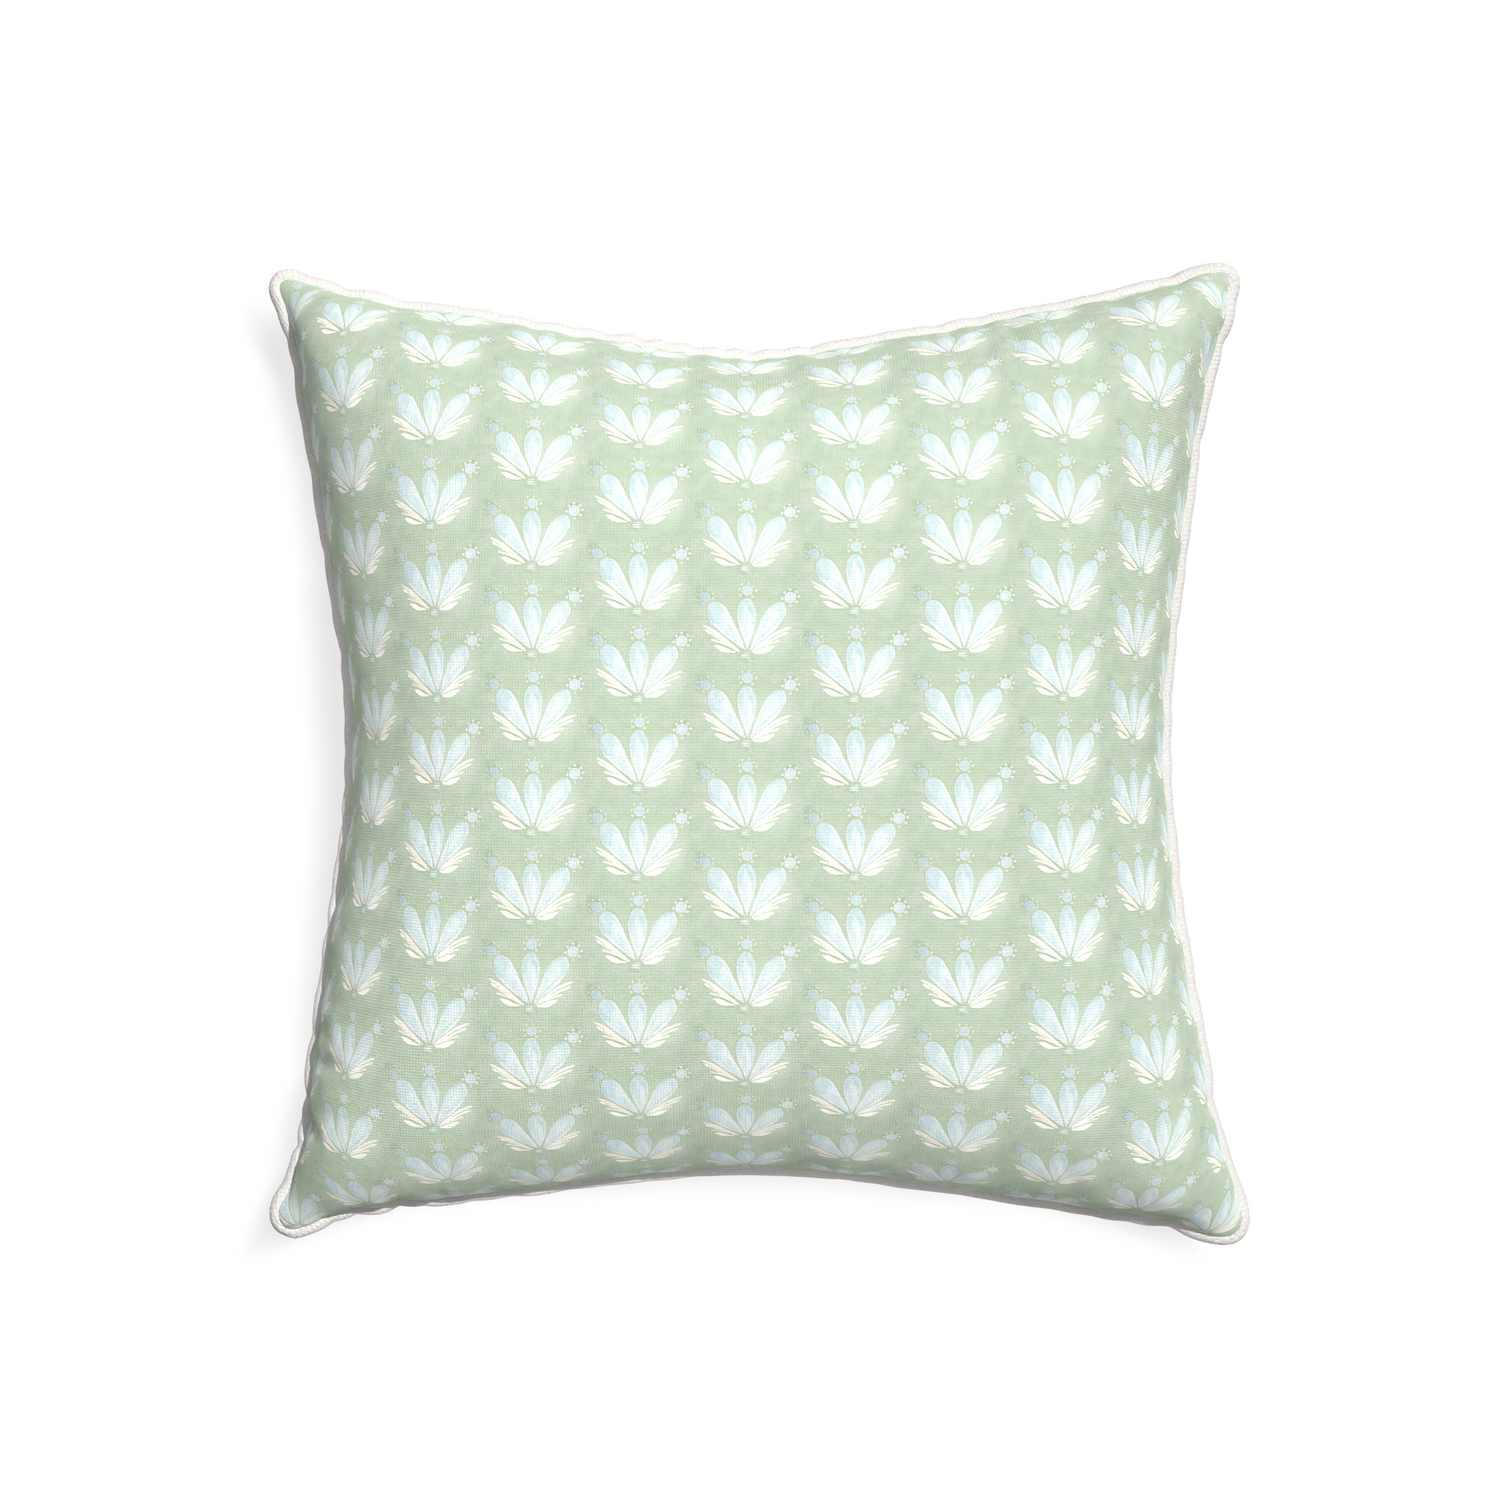 22-square serena sea salt custom blue & green floral drop repeatpillow with snow piping on white background